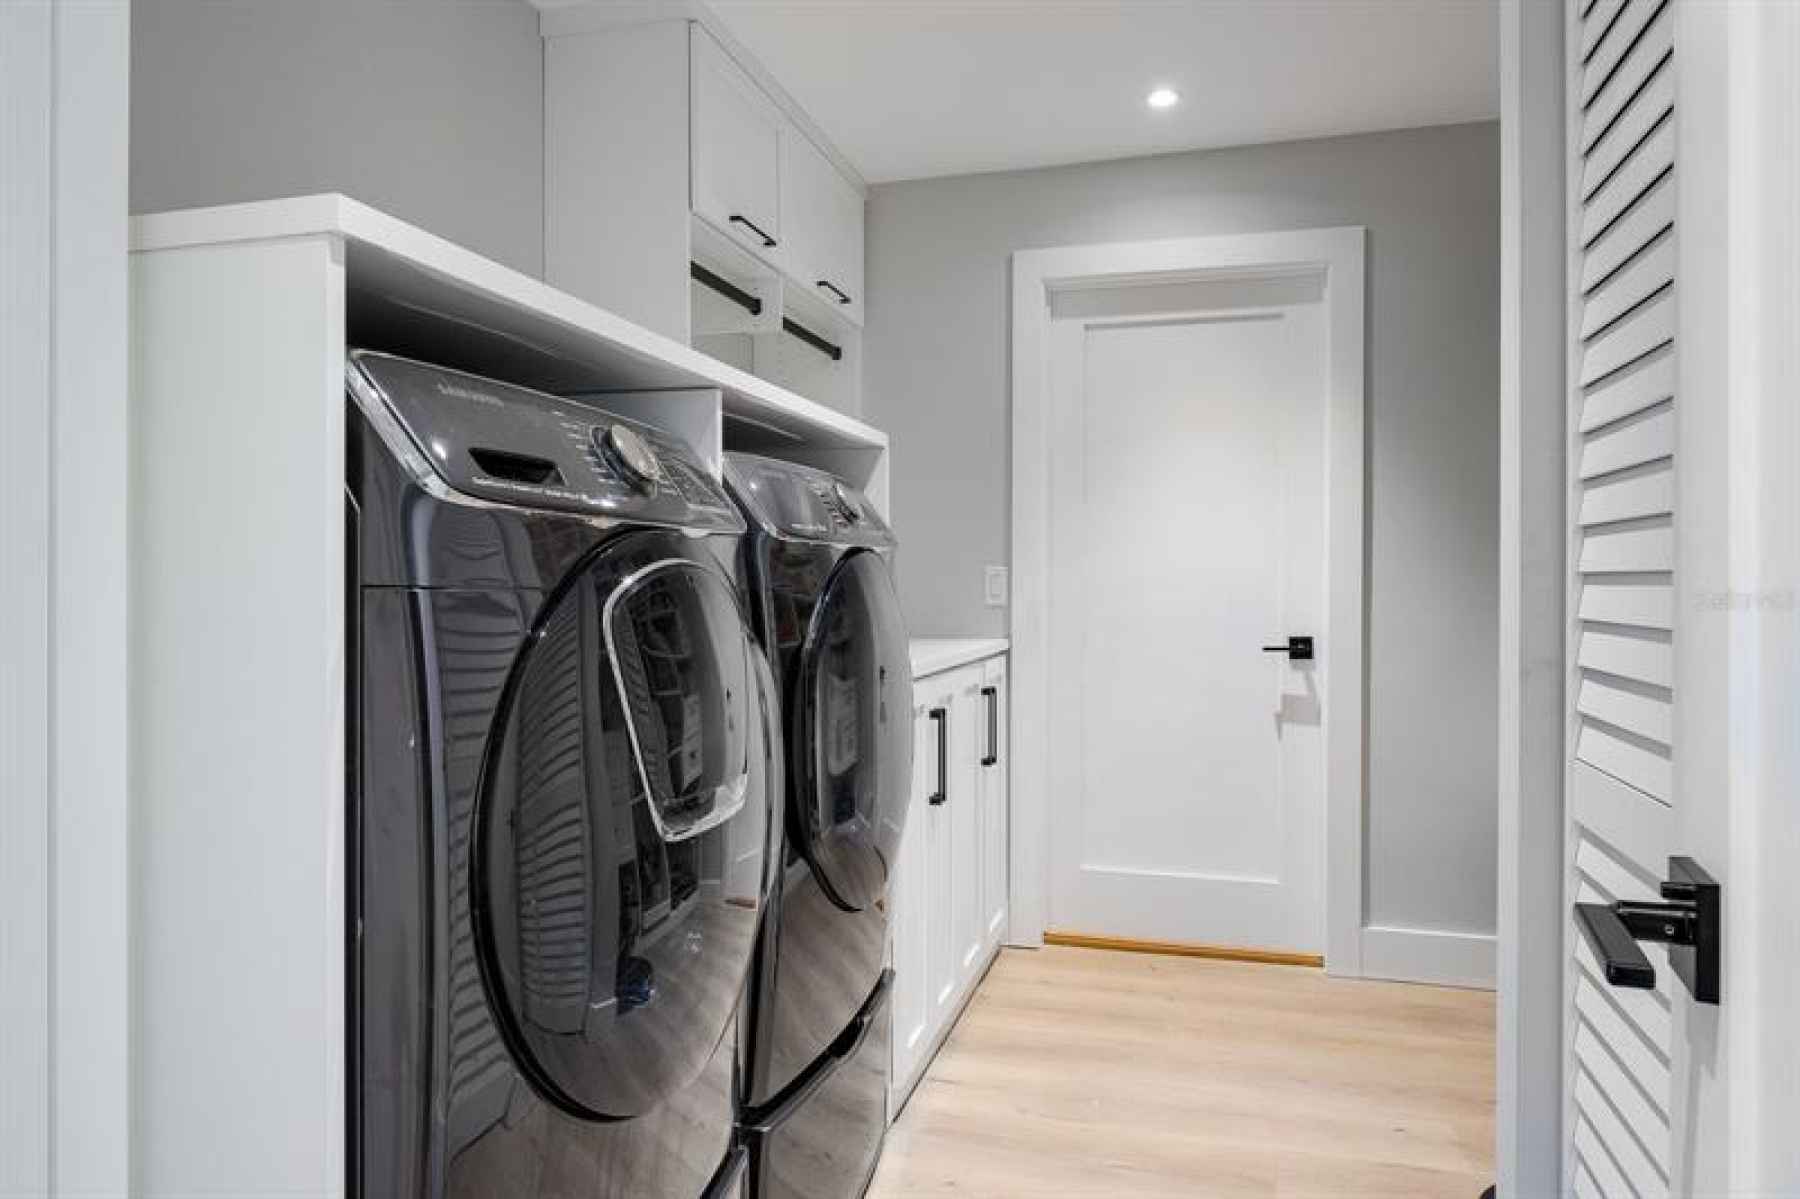 Huge laundry room with folding center, and plenty of storage for utility items and extra kitchen war